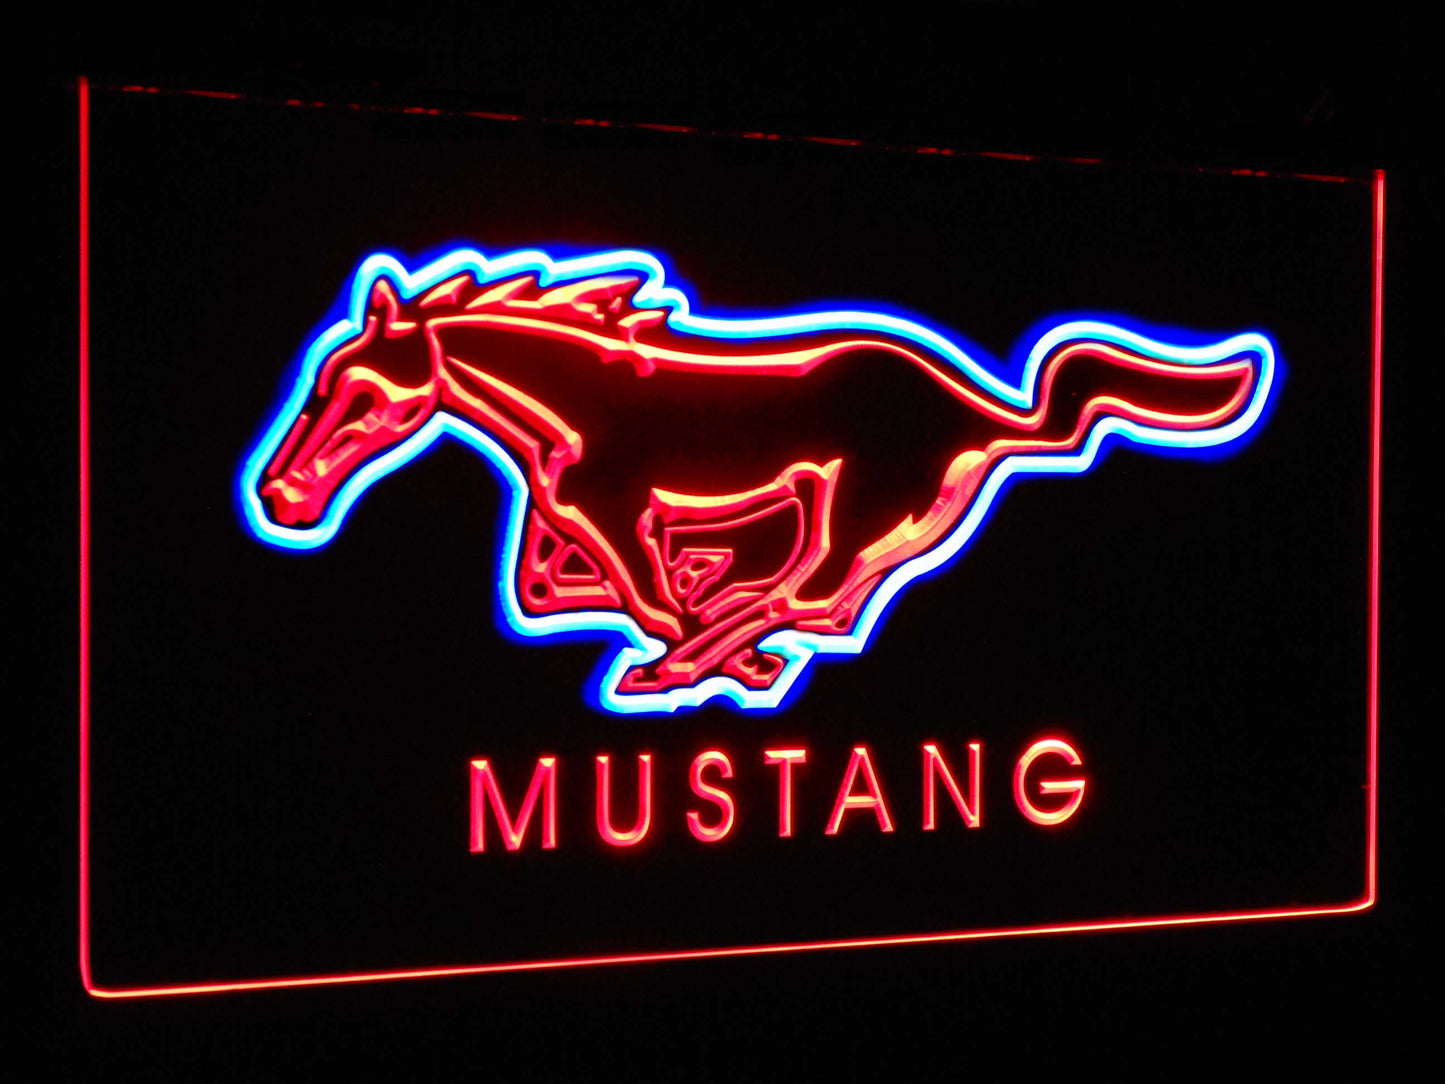 Mustang Ford Horse Car Bar Decoration Gift Dual Color Led Neon Light Signs st6-d0054 by Woody Signs Co. - Handmade Crafted Unique Wooden Creative